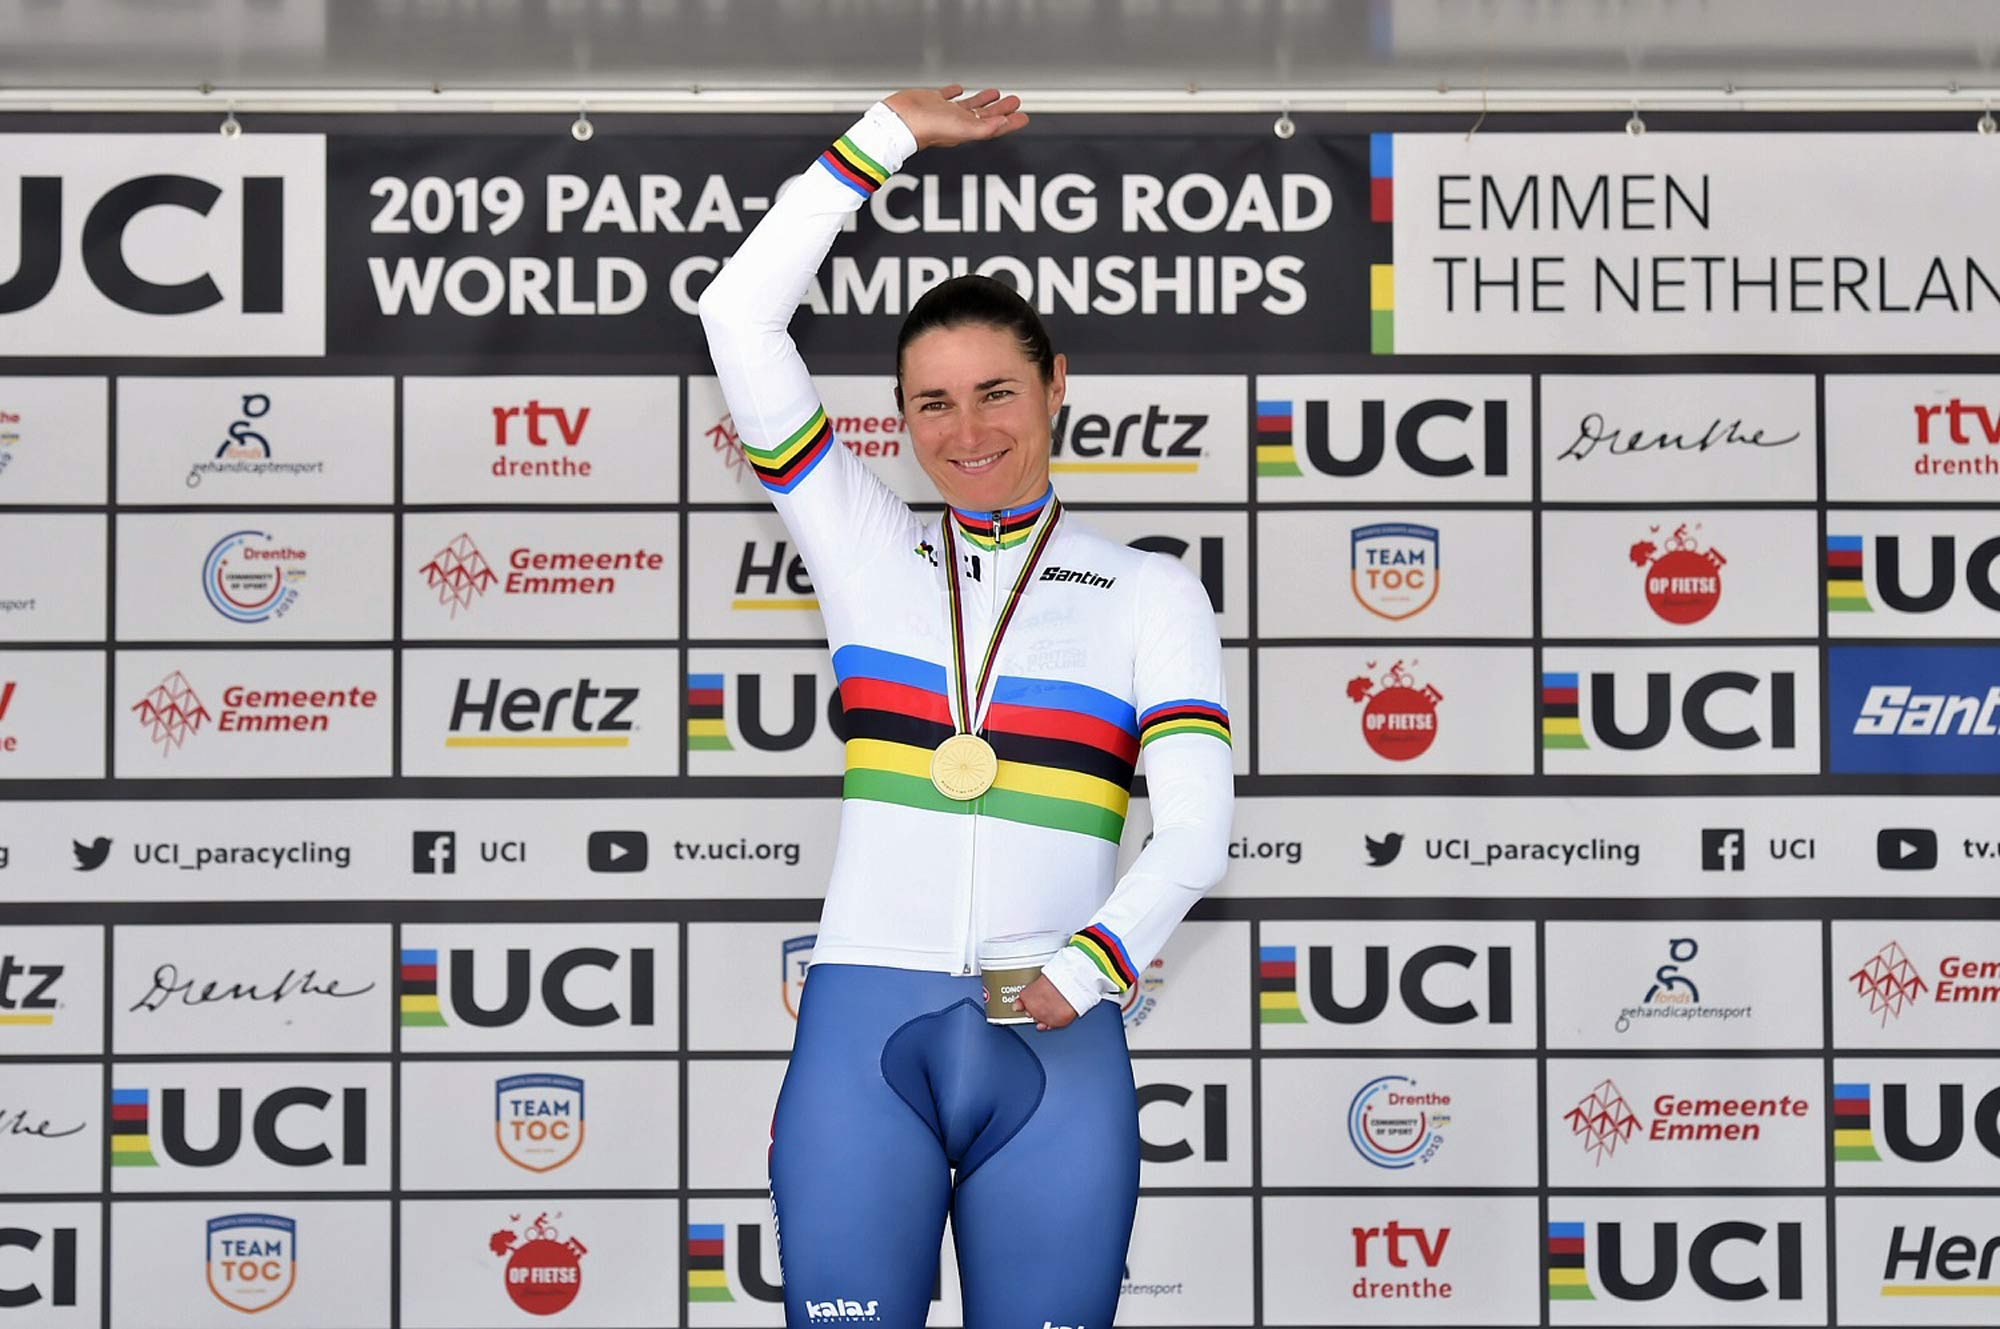 Dame Sarah Storey, who won the WC5 Individual Time Trial and Road Race at the 2019 UCI Para-Cycling Road World Championships in Emmen